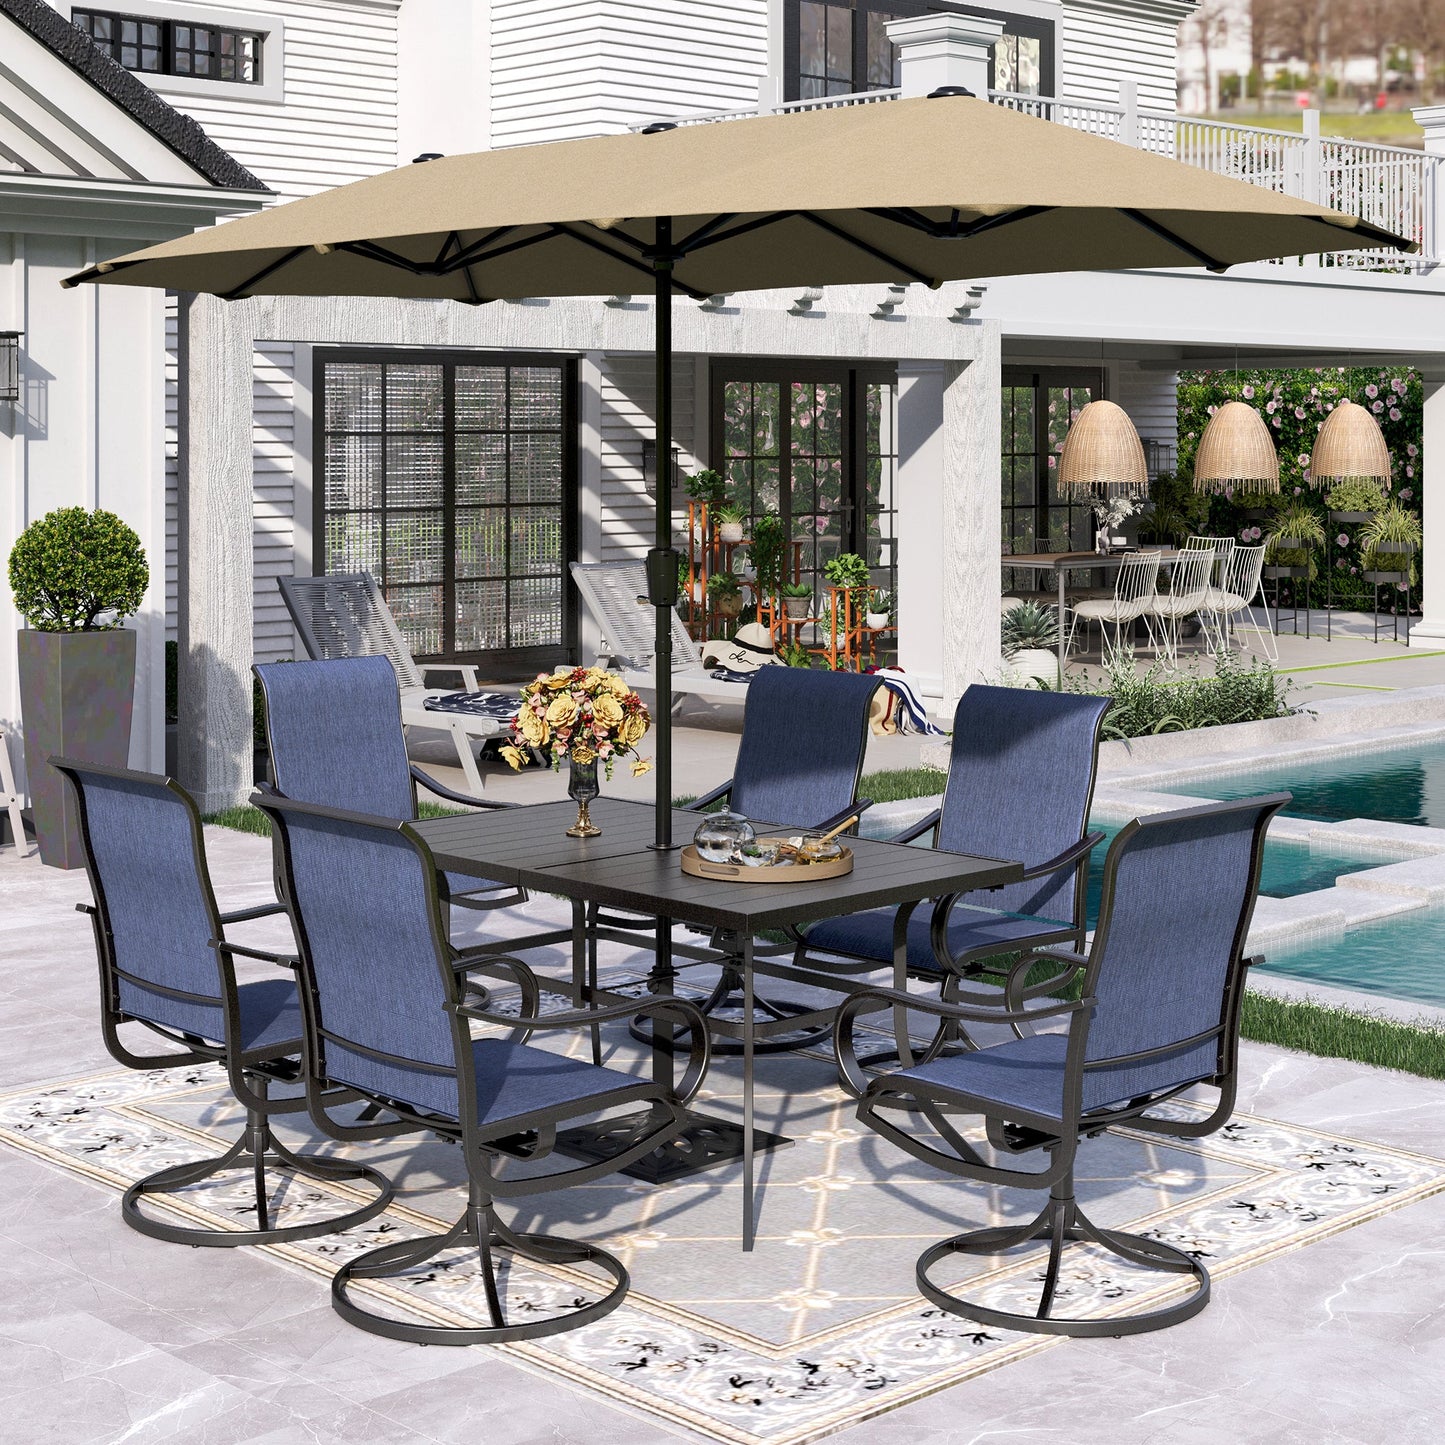 Sophia & William 8-Piece Outdoor Patio Dining Set with 13ft Beige Umbrella, Rectangle Table & Blue Textilene Chairs Furniture Set